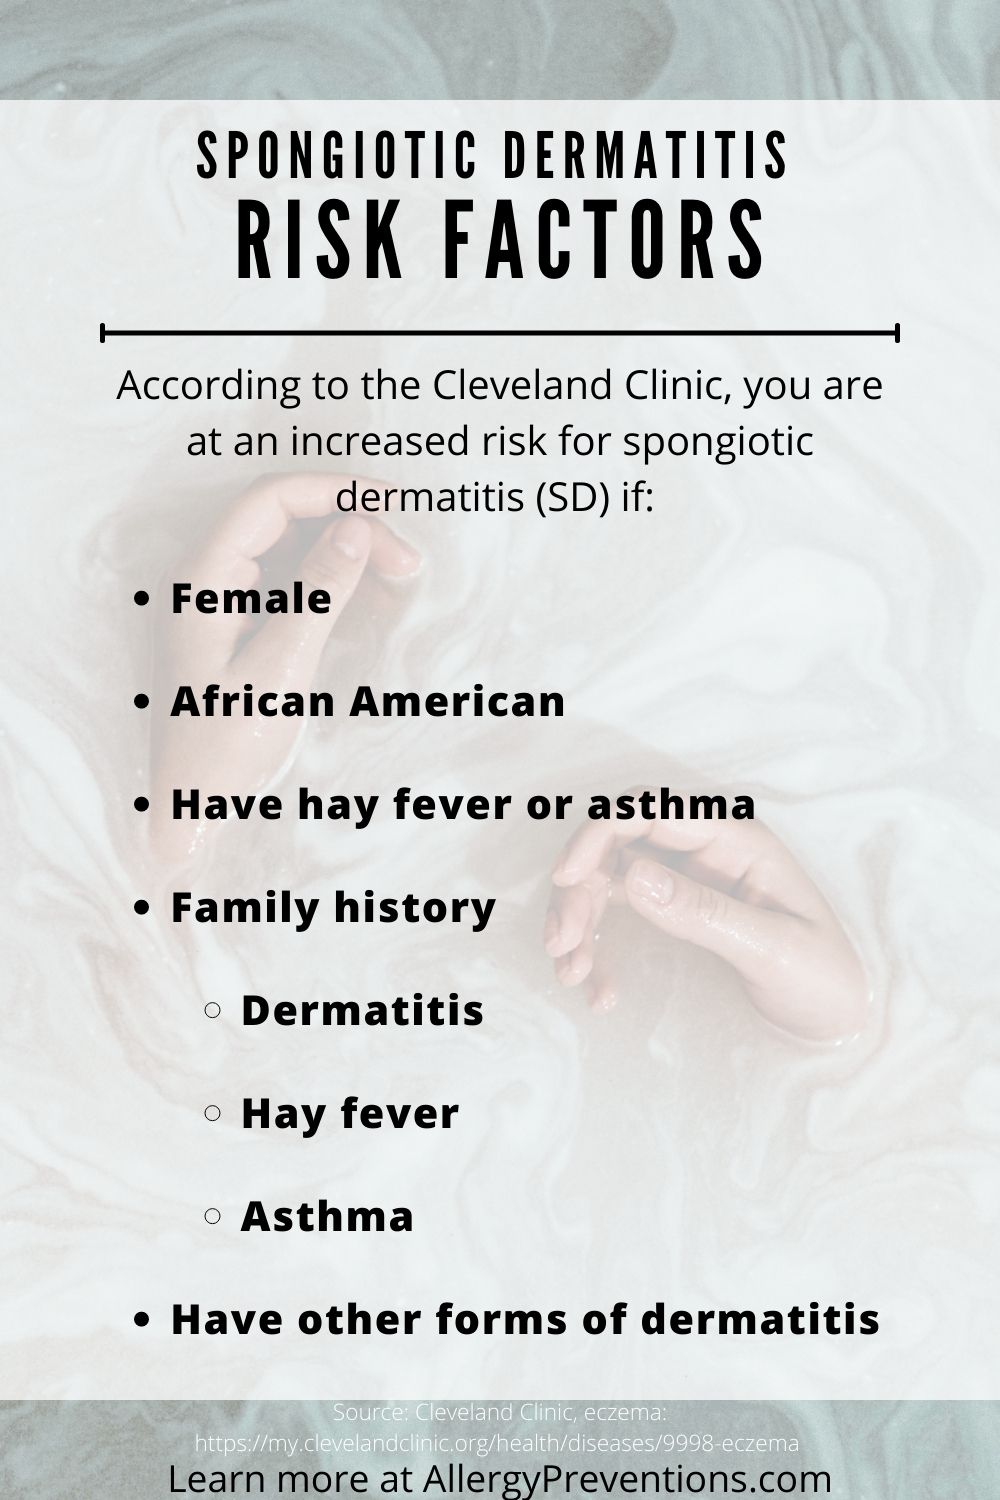 spongiotic dermatitis infographic - risk factors. According to the Cleveland clinic, you are at an increased risk for spongiotic dermatitis (SD) if: Female, African American, have hay fever or asthma, family history of dermatitis, hay fever or asthma, or have other forms of dermatitis. Learn more at allergypreventions.com